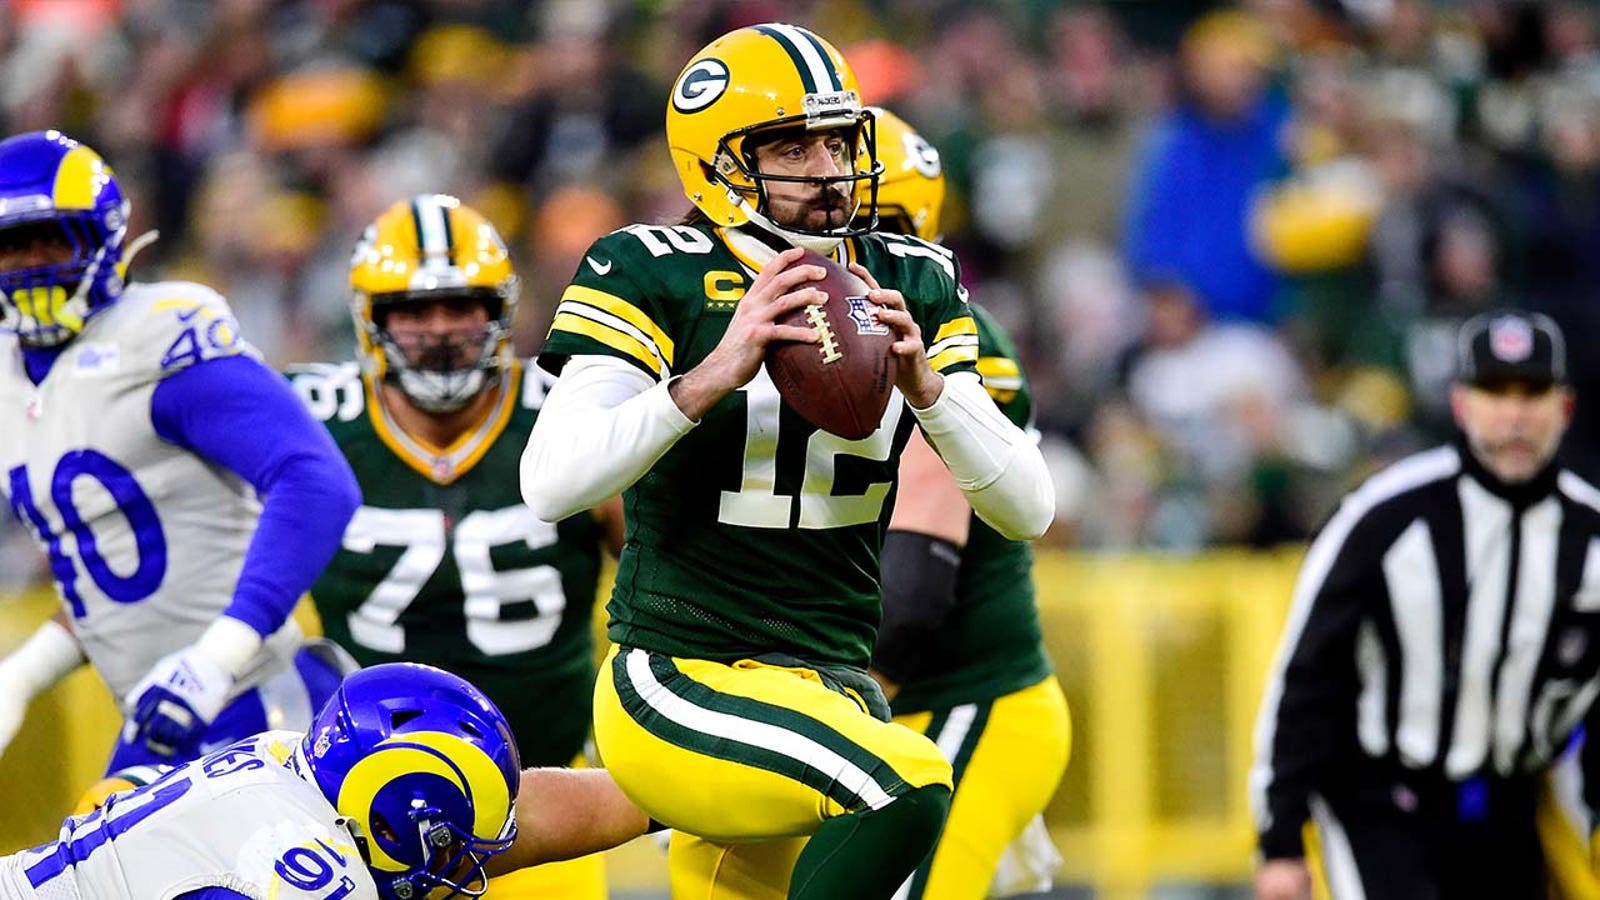 Aaron Rodgers delivers for the Packers despite battling a toe injury in a 36-28 win over Rams